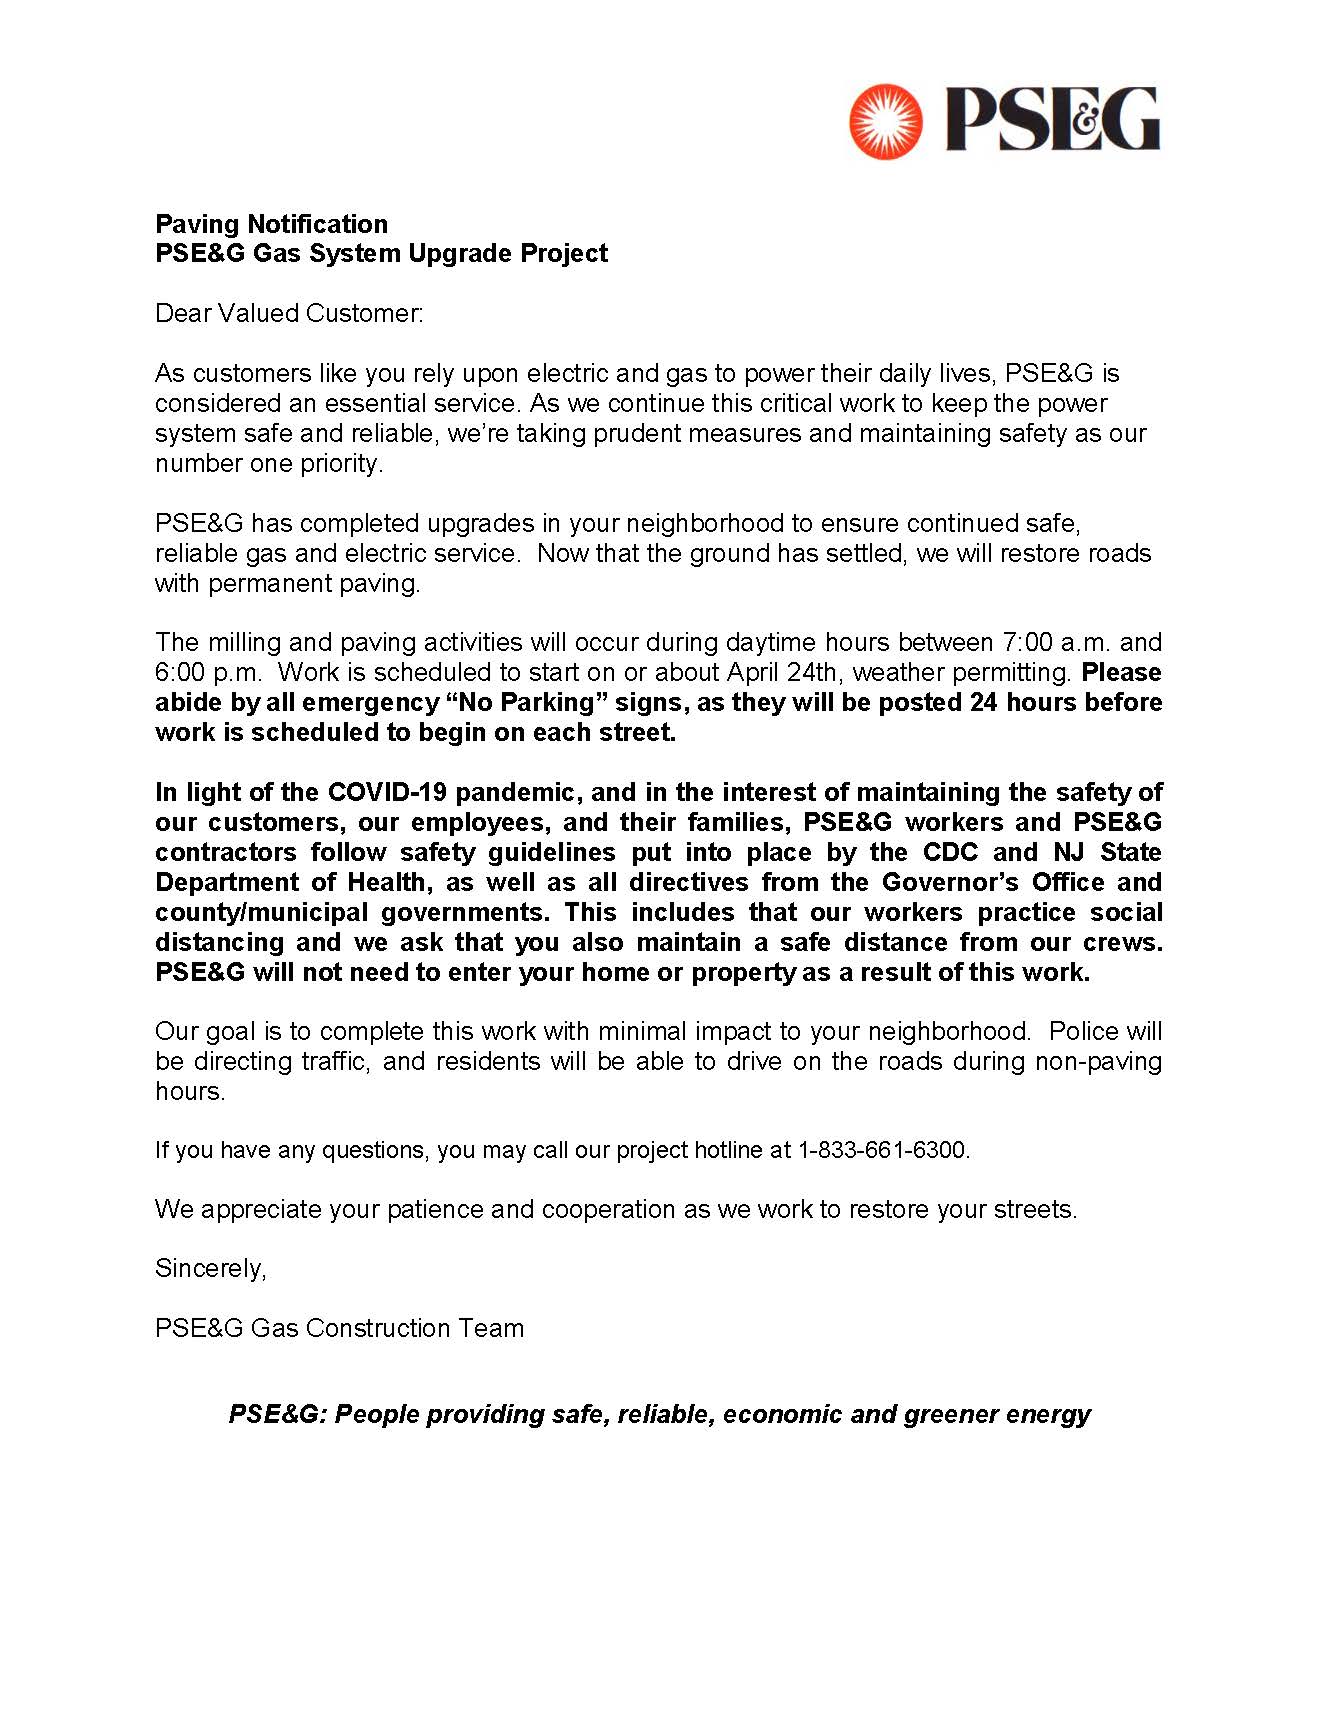 Updated paving letter-6300